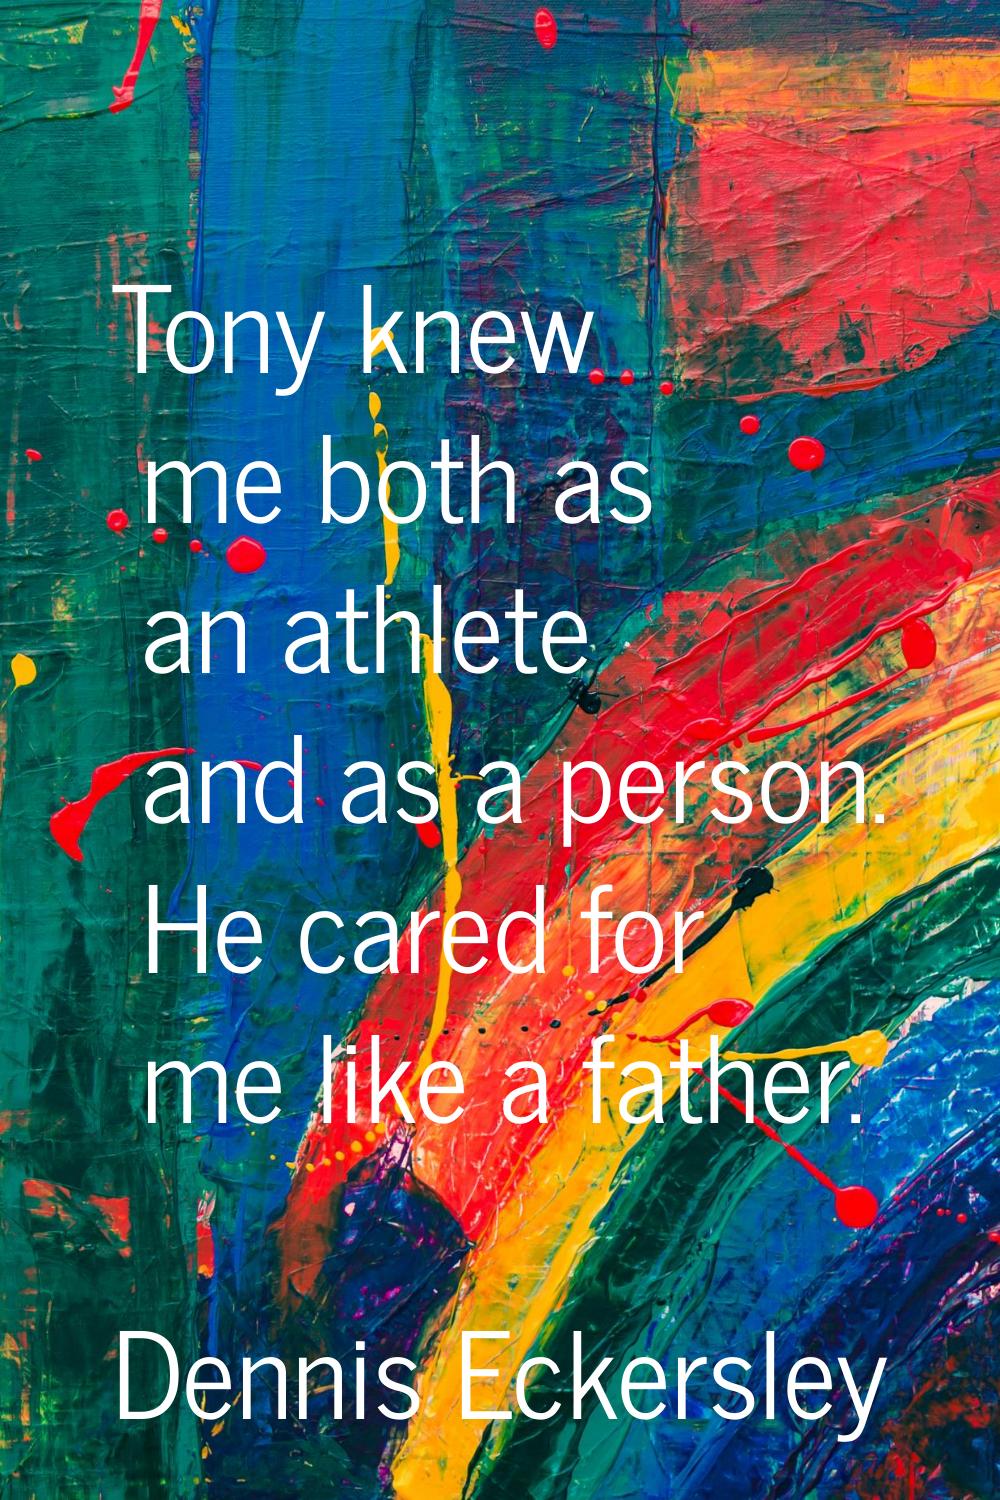 Tony knew me both as an athlete and as a person. He cared for me like a father.